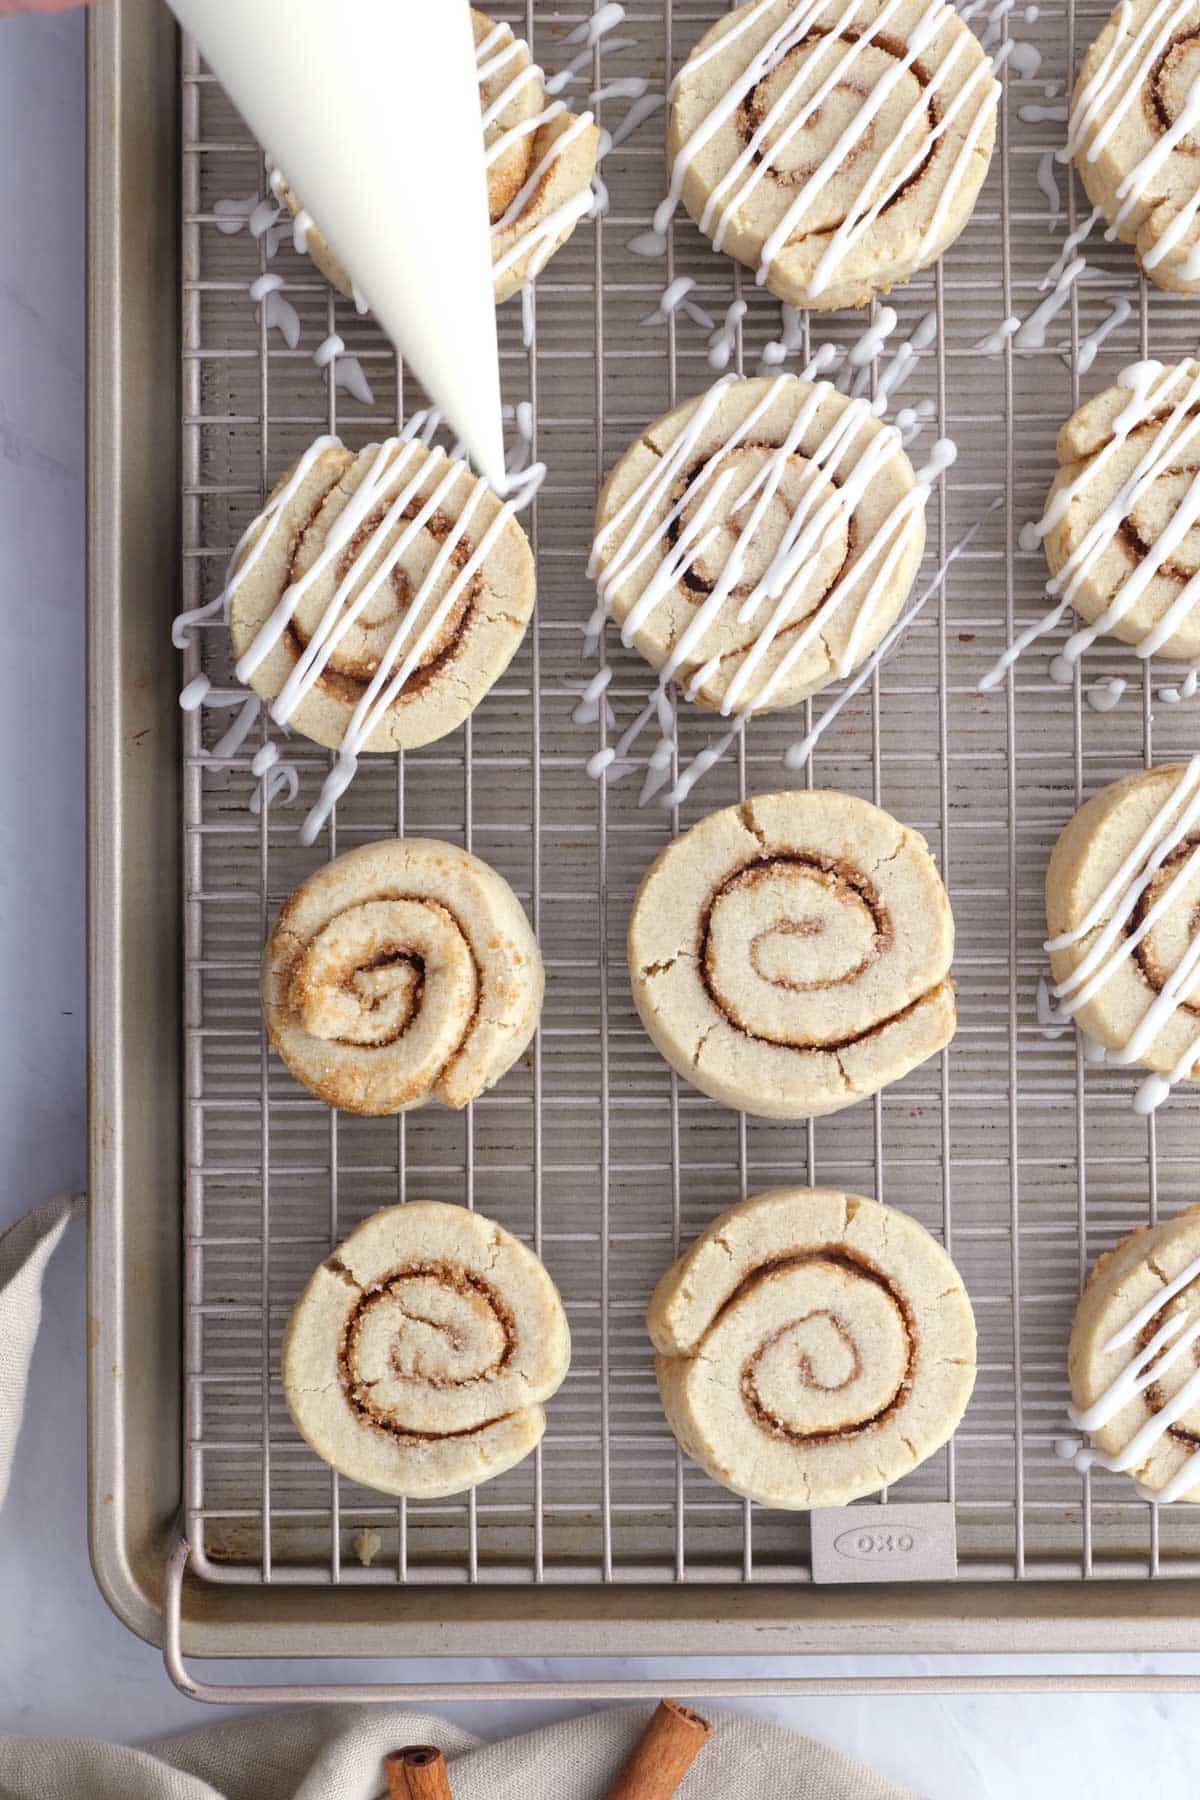 Cinnamon roll cookies are iced on a wire rack.